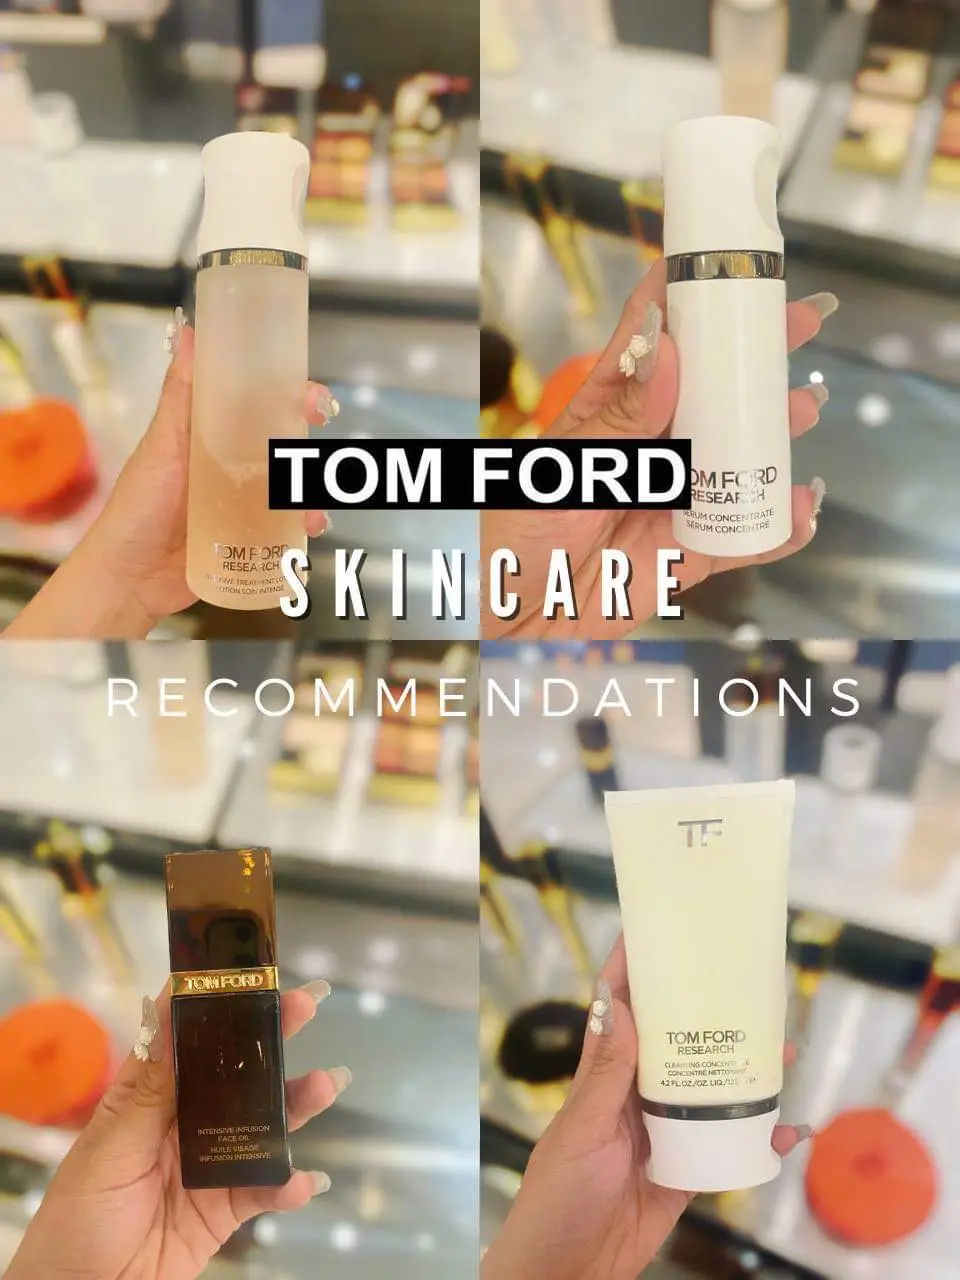 Tom Ford Skincare Recommendation | Gallery posted by Bella Sophia | Lemon8